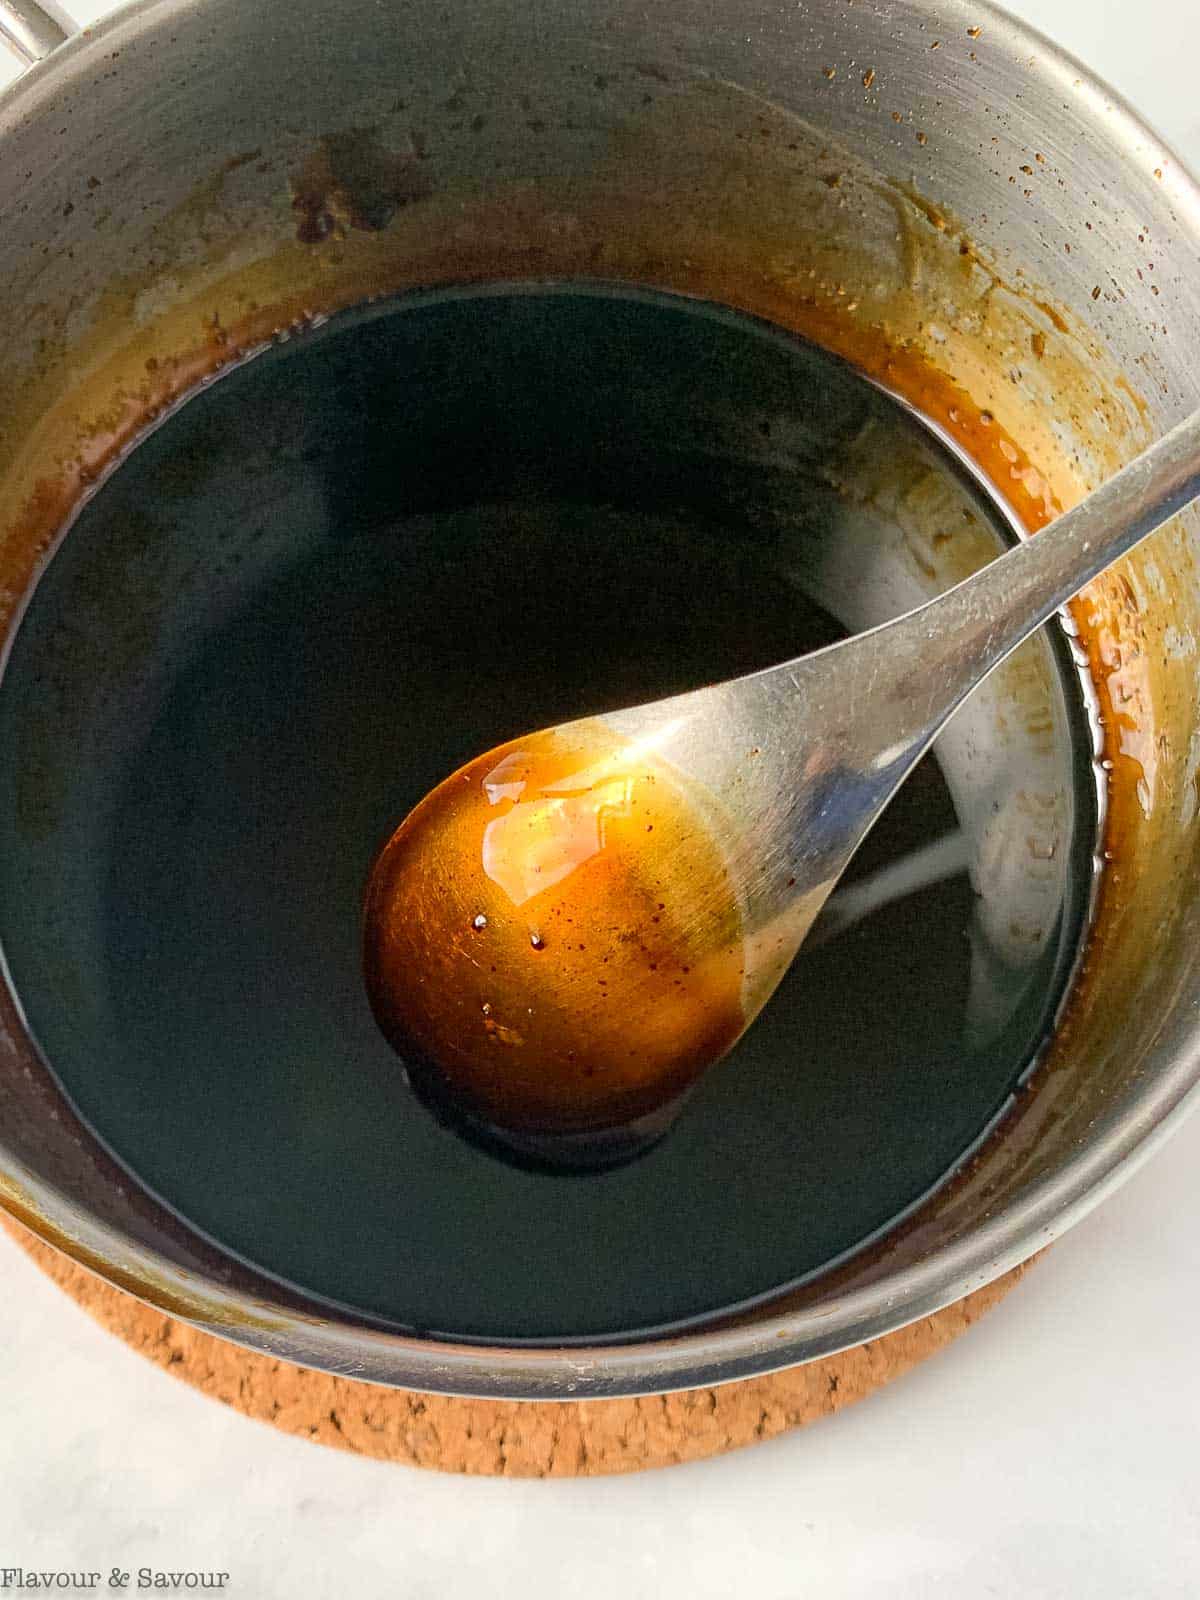 Balsamic glaze coating the back of a spoon.